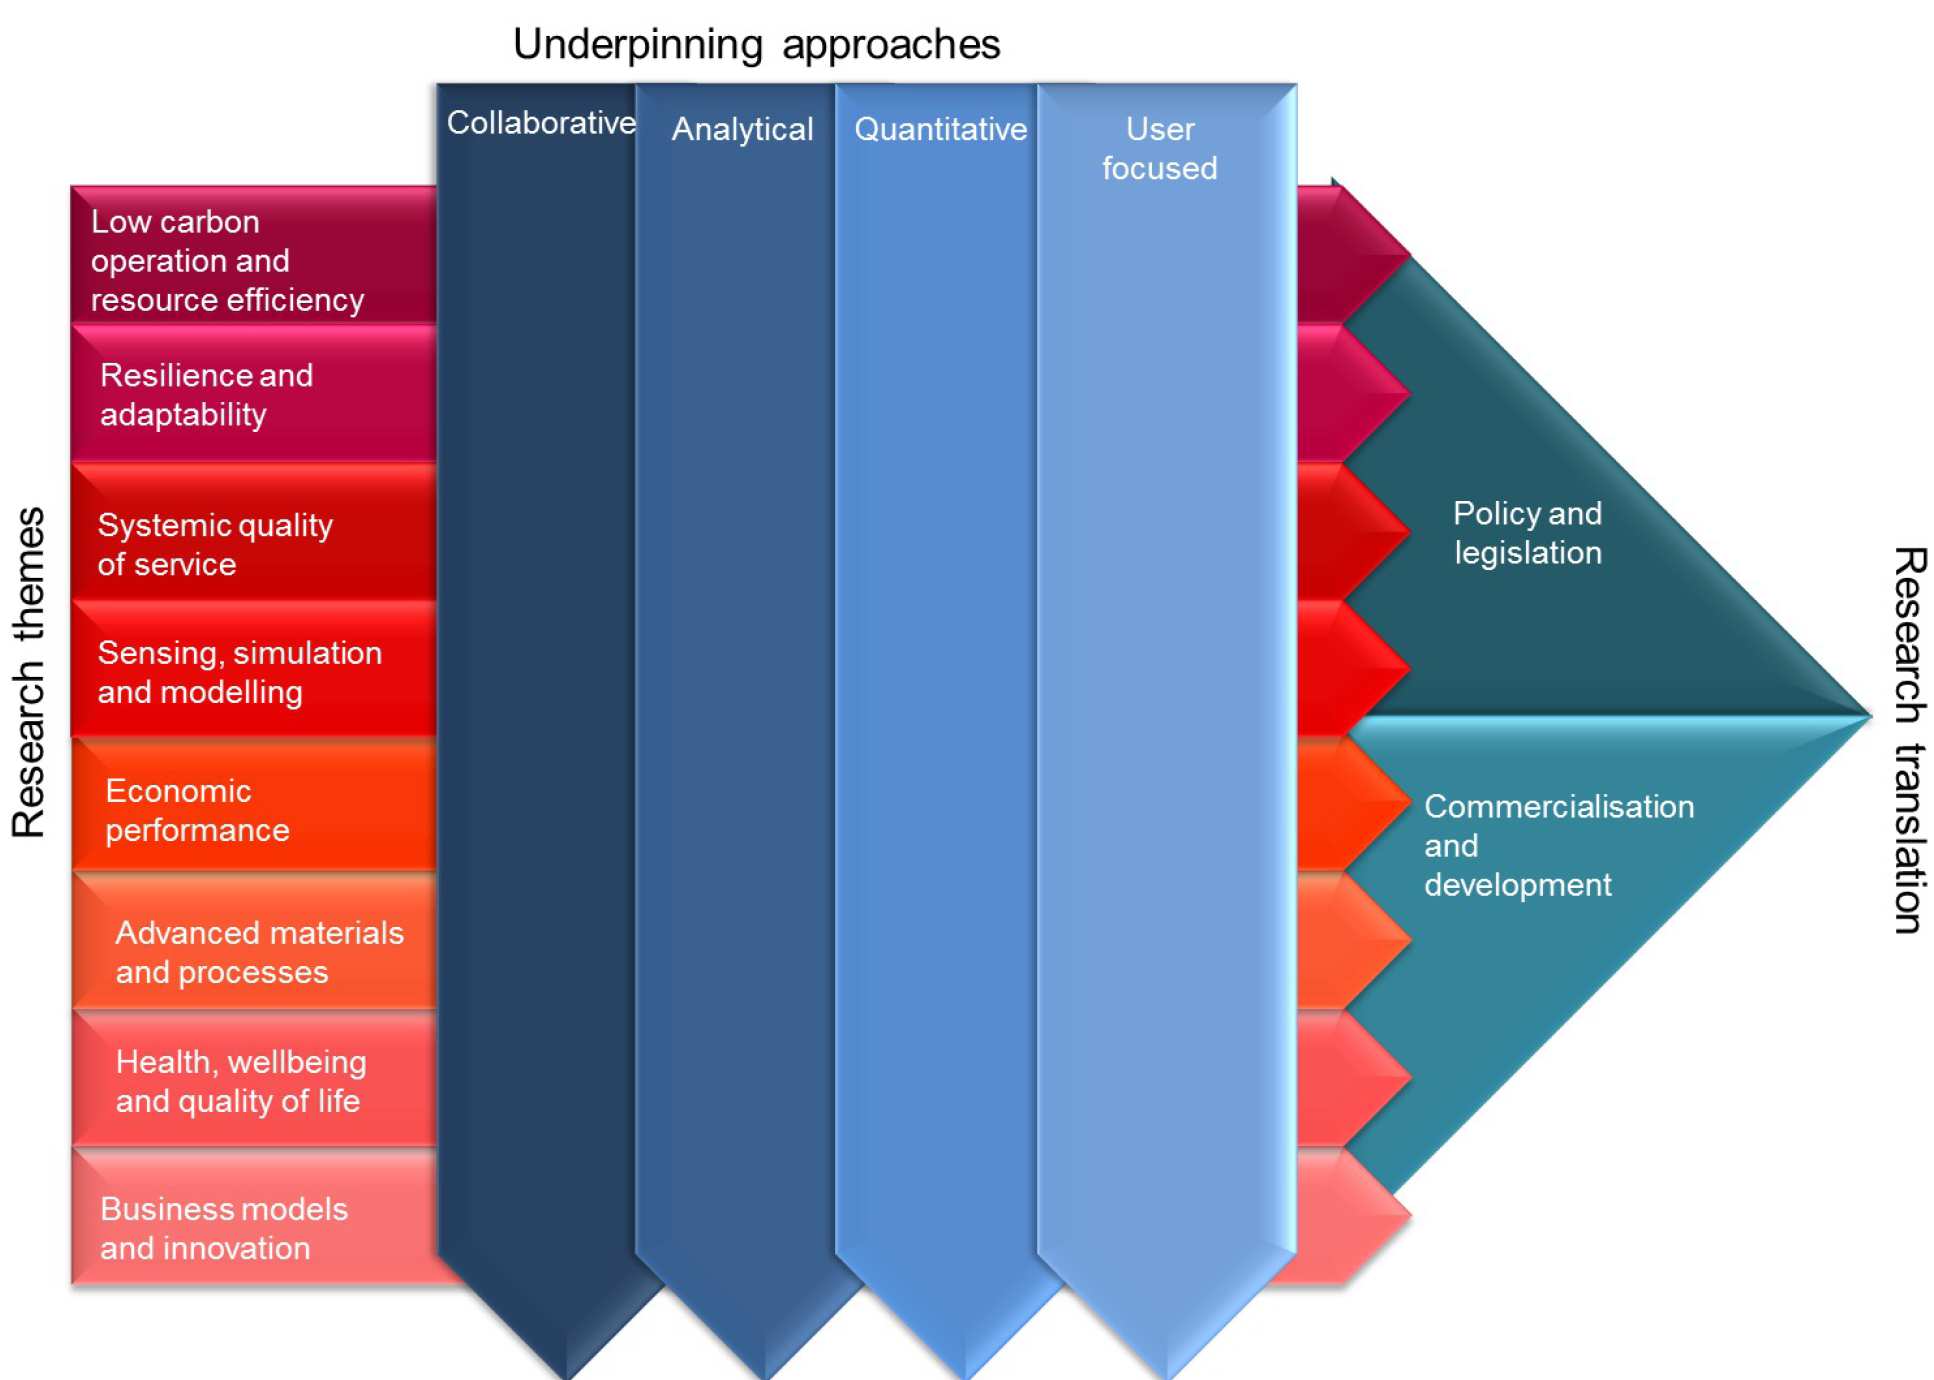 Urban Systems Lab's eight research themes and underlying approaches